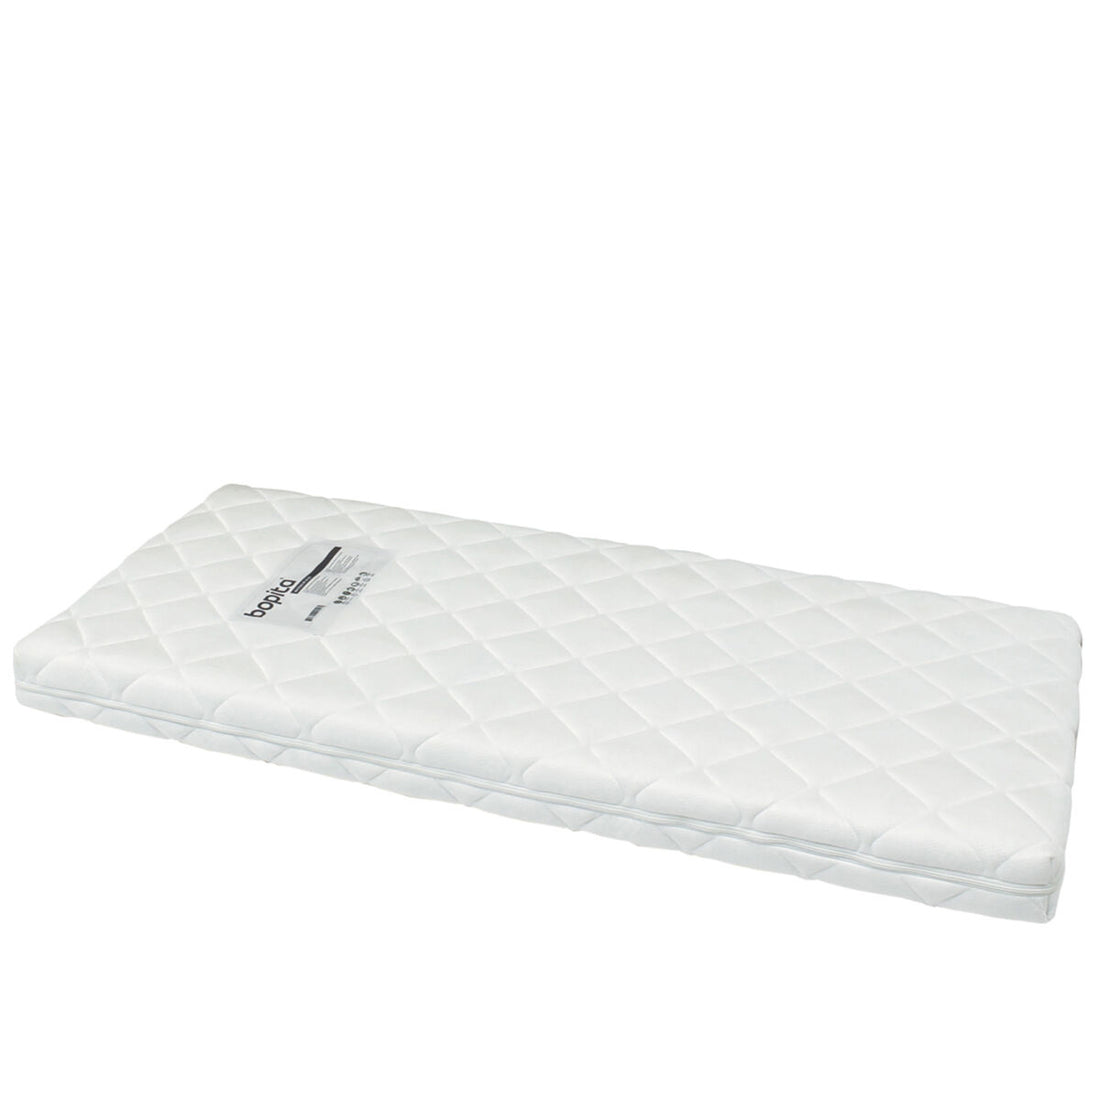 bopita-mattress-sg25-for-90x200cm-bed-drawer-with-removable-cover-90x195cm-bopt-256400- (1)